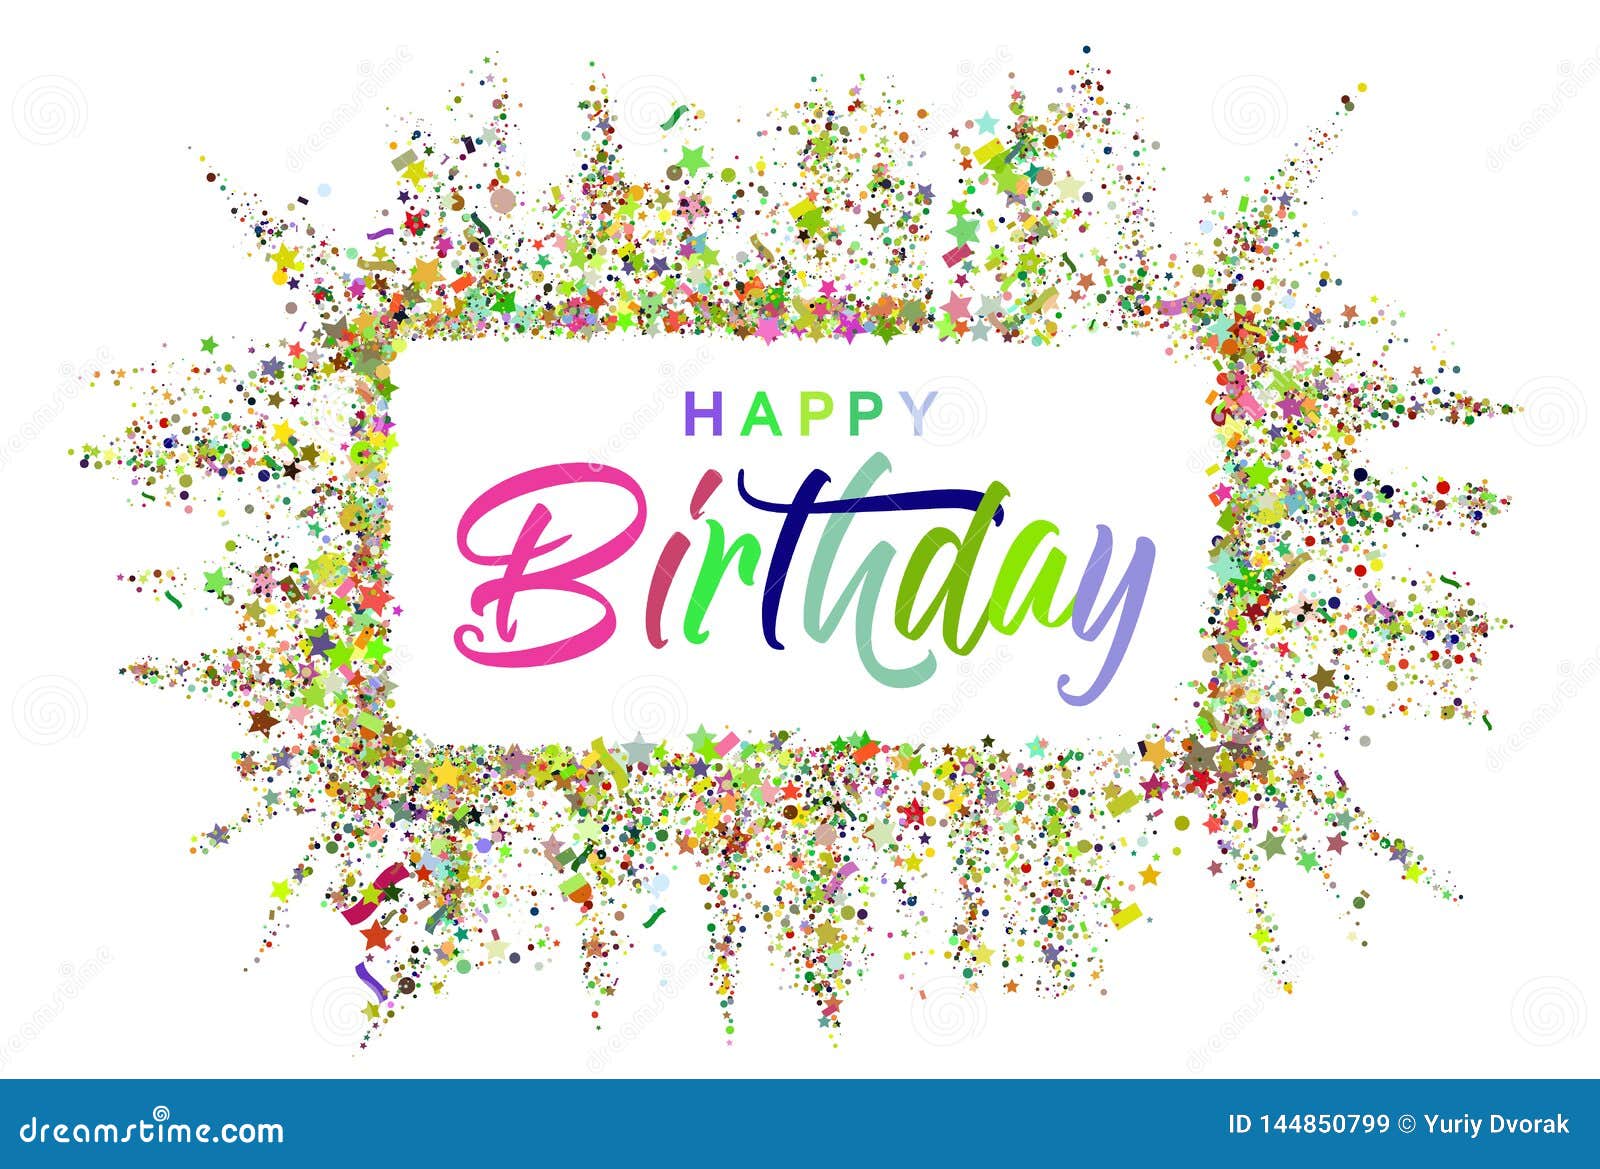 Happy Birthday Typography Design for Greeting Cards and Invitation ...